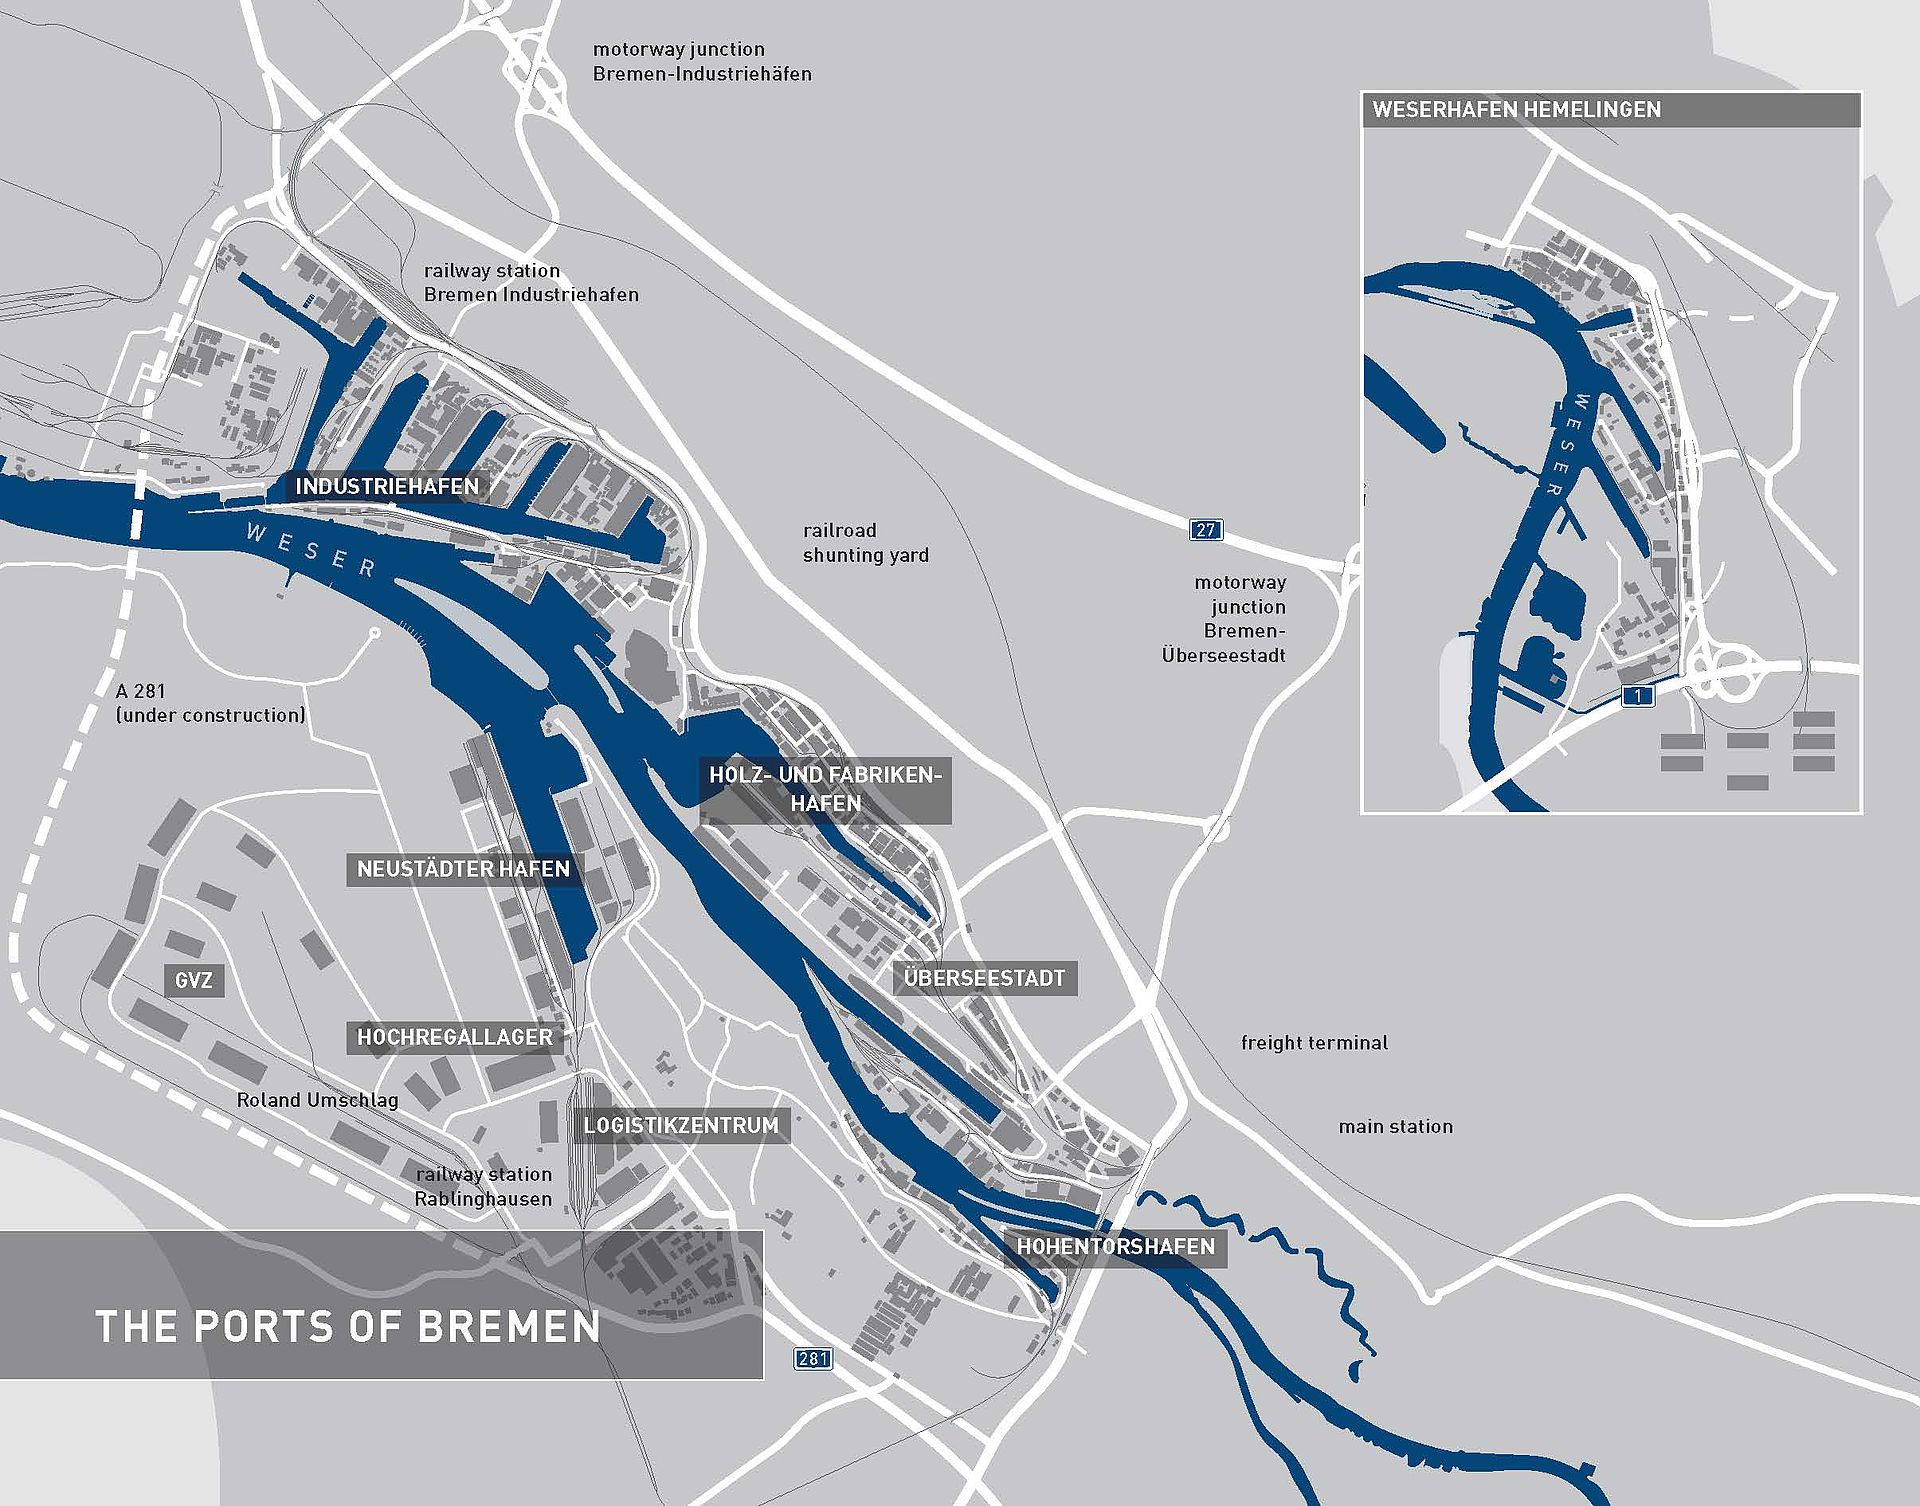 Map of the area and locations of the ports of Bremen 